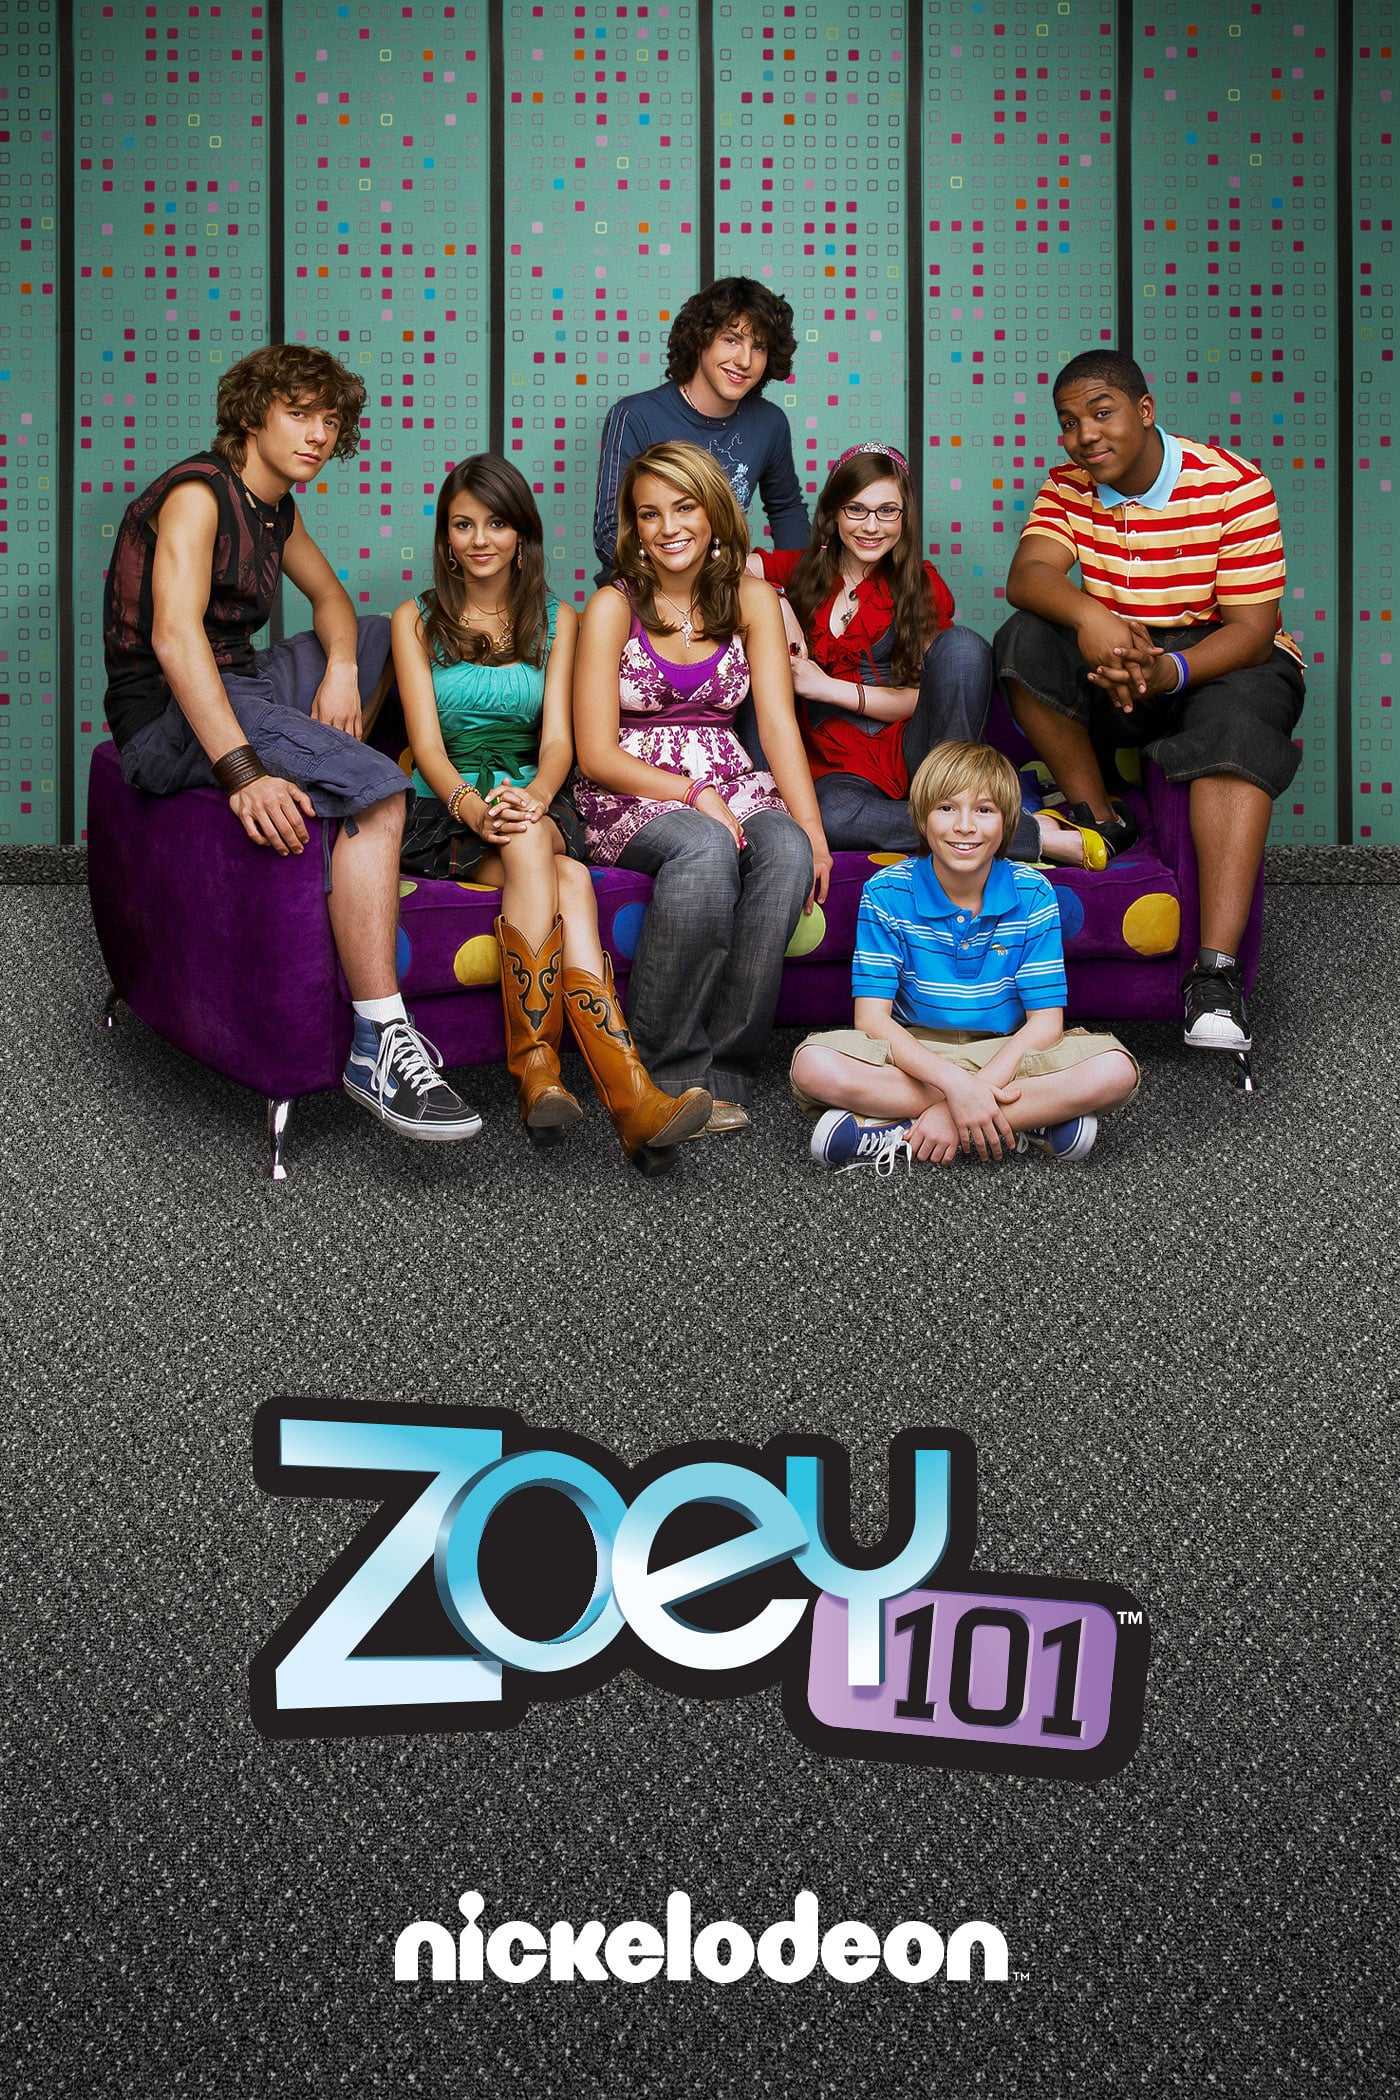 Zoey 101 TV Shows About Boarding School